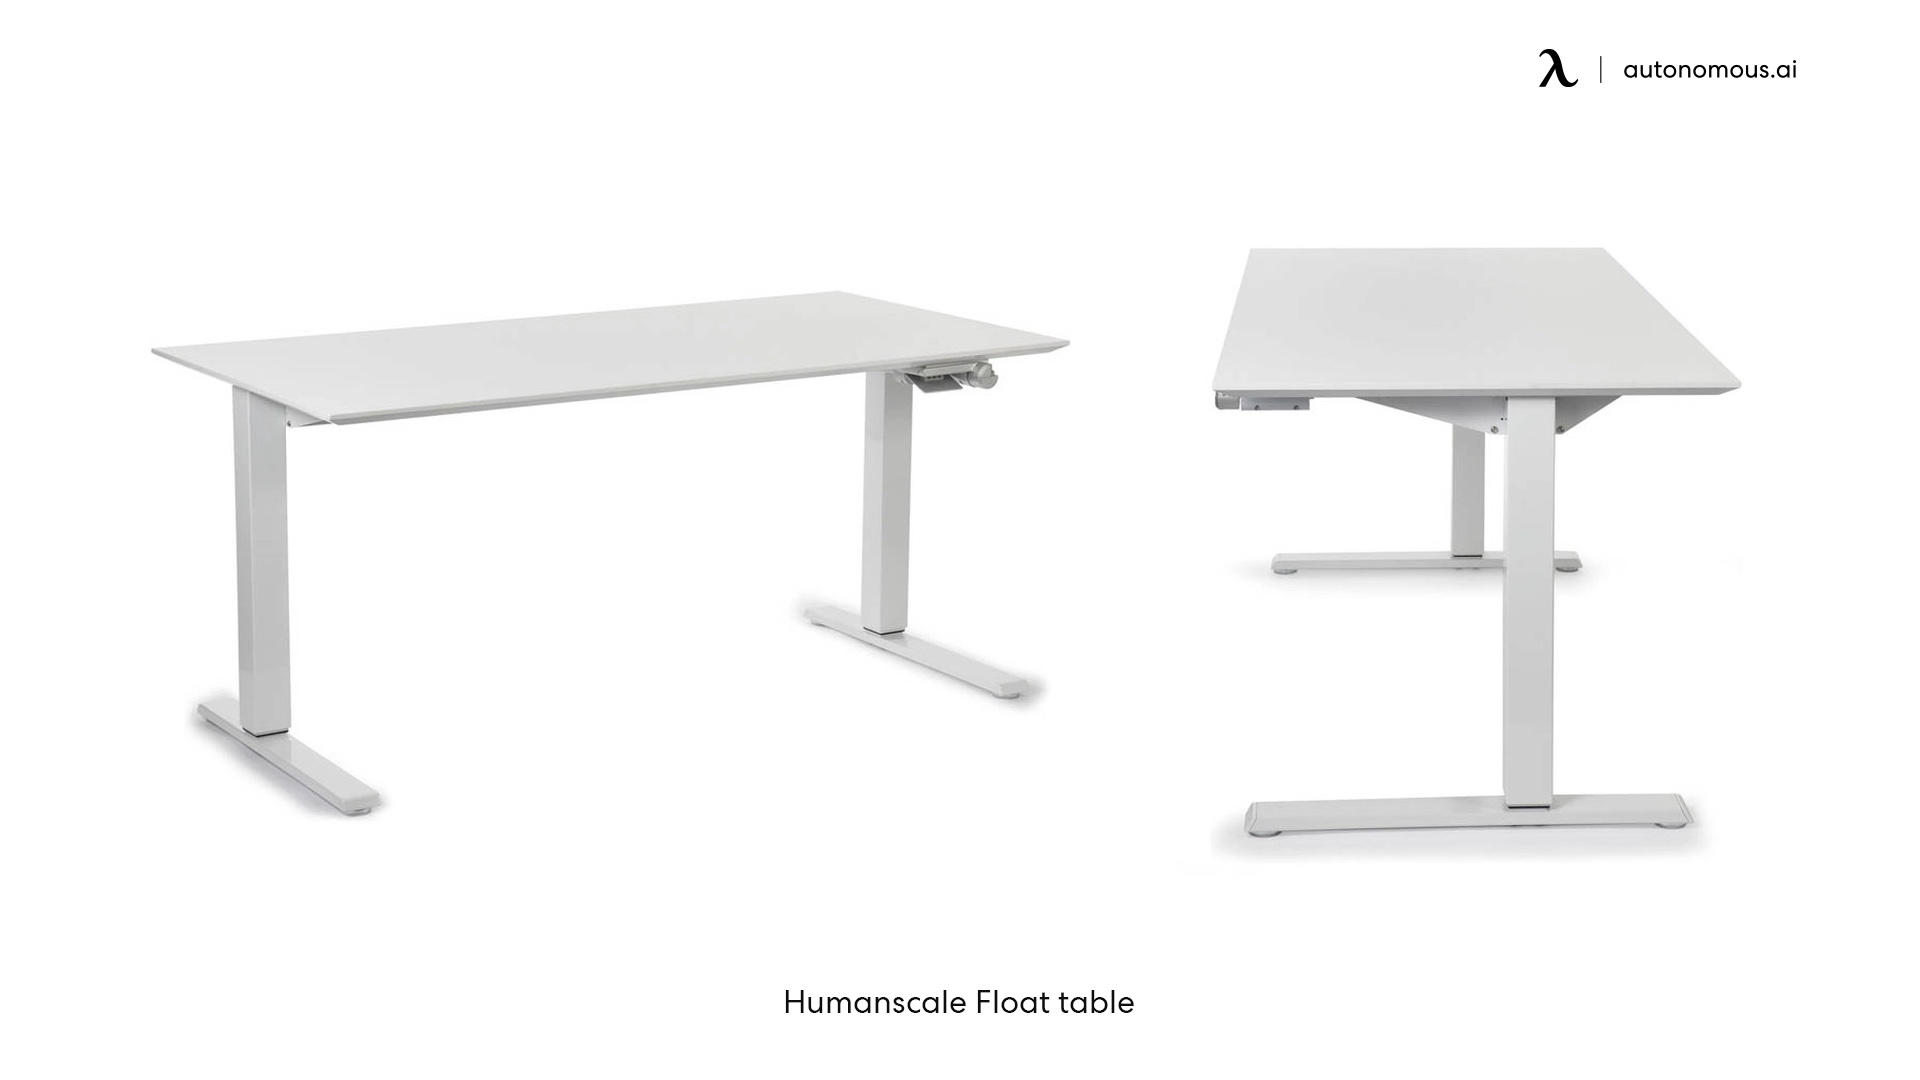 Humanscale Float table